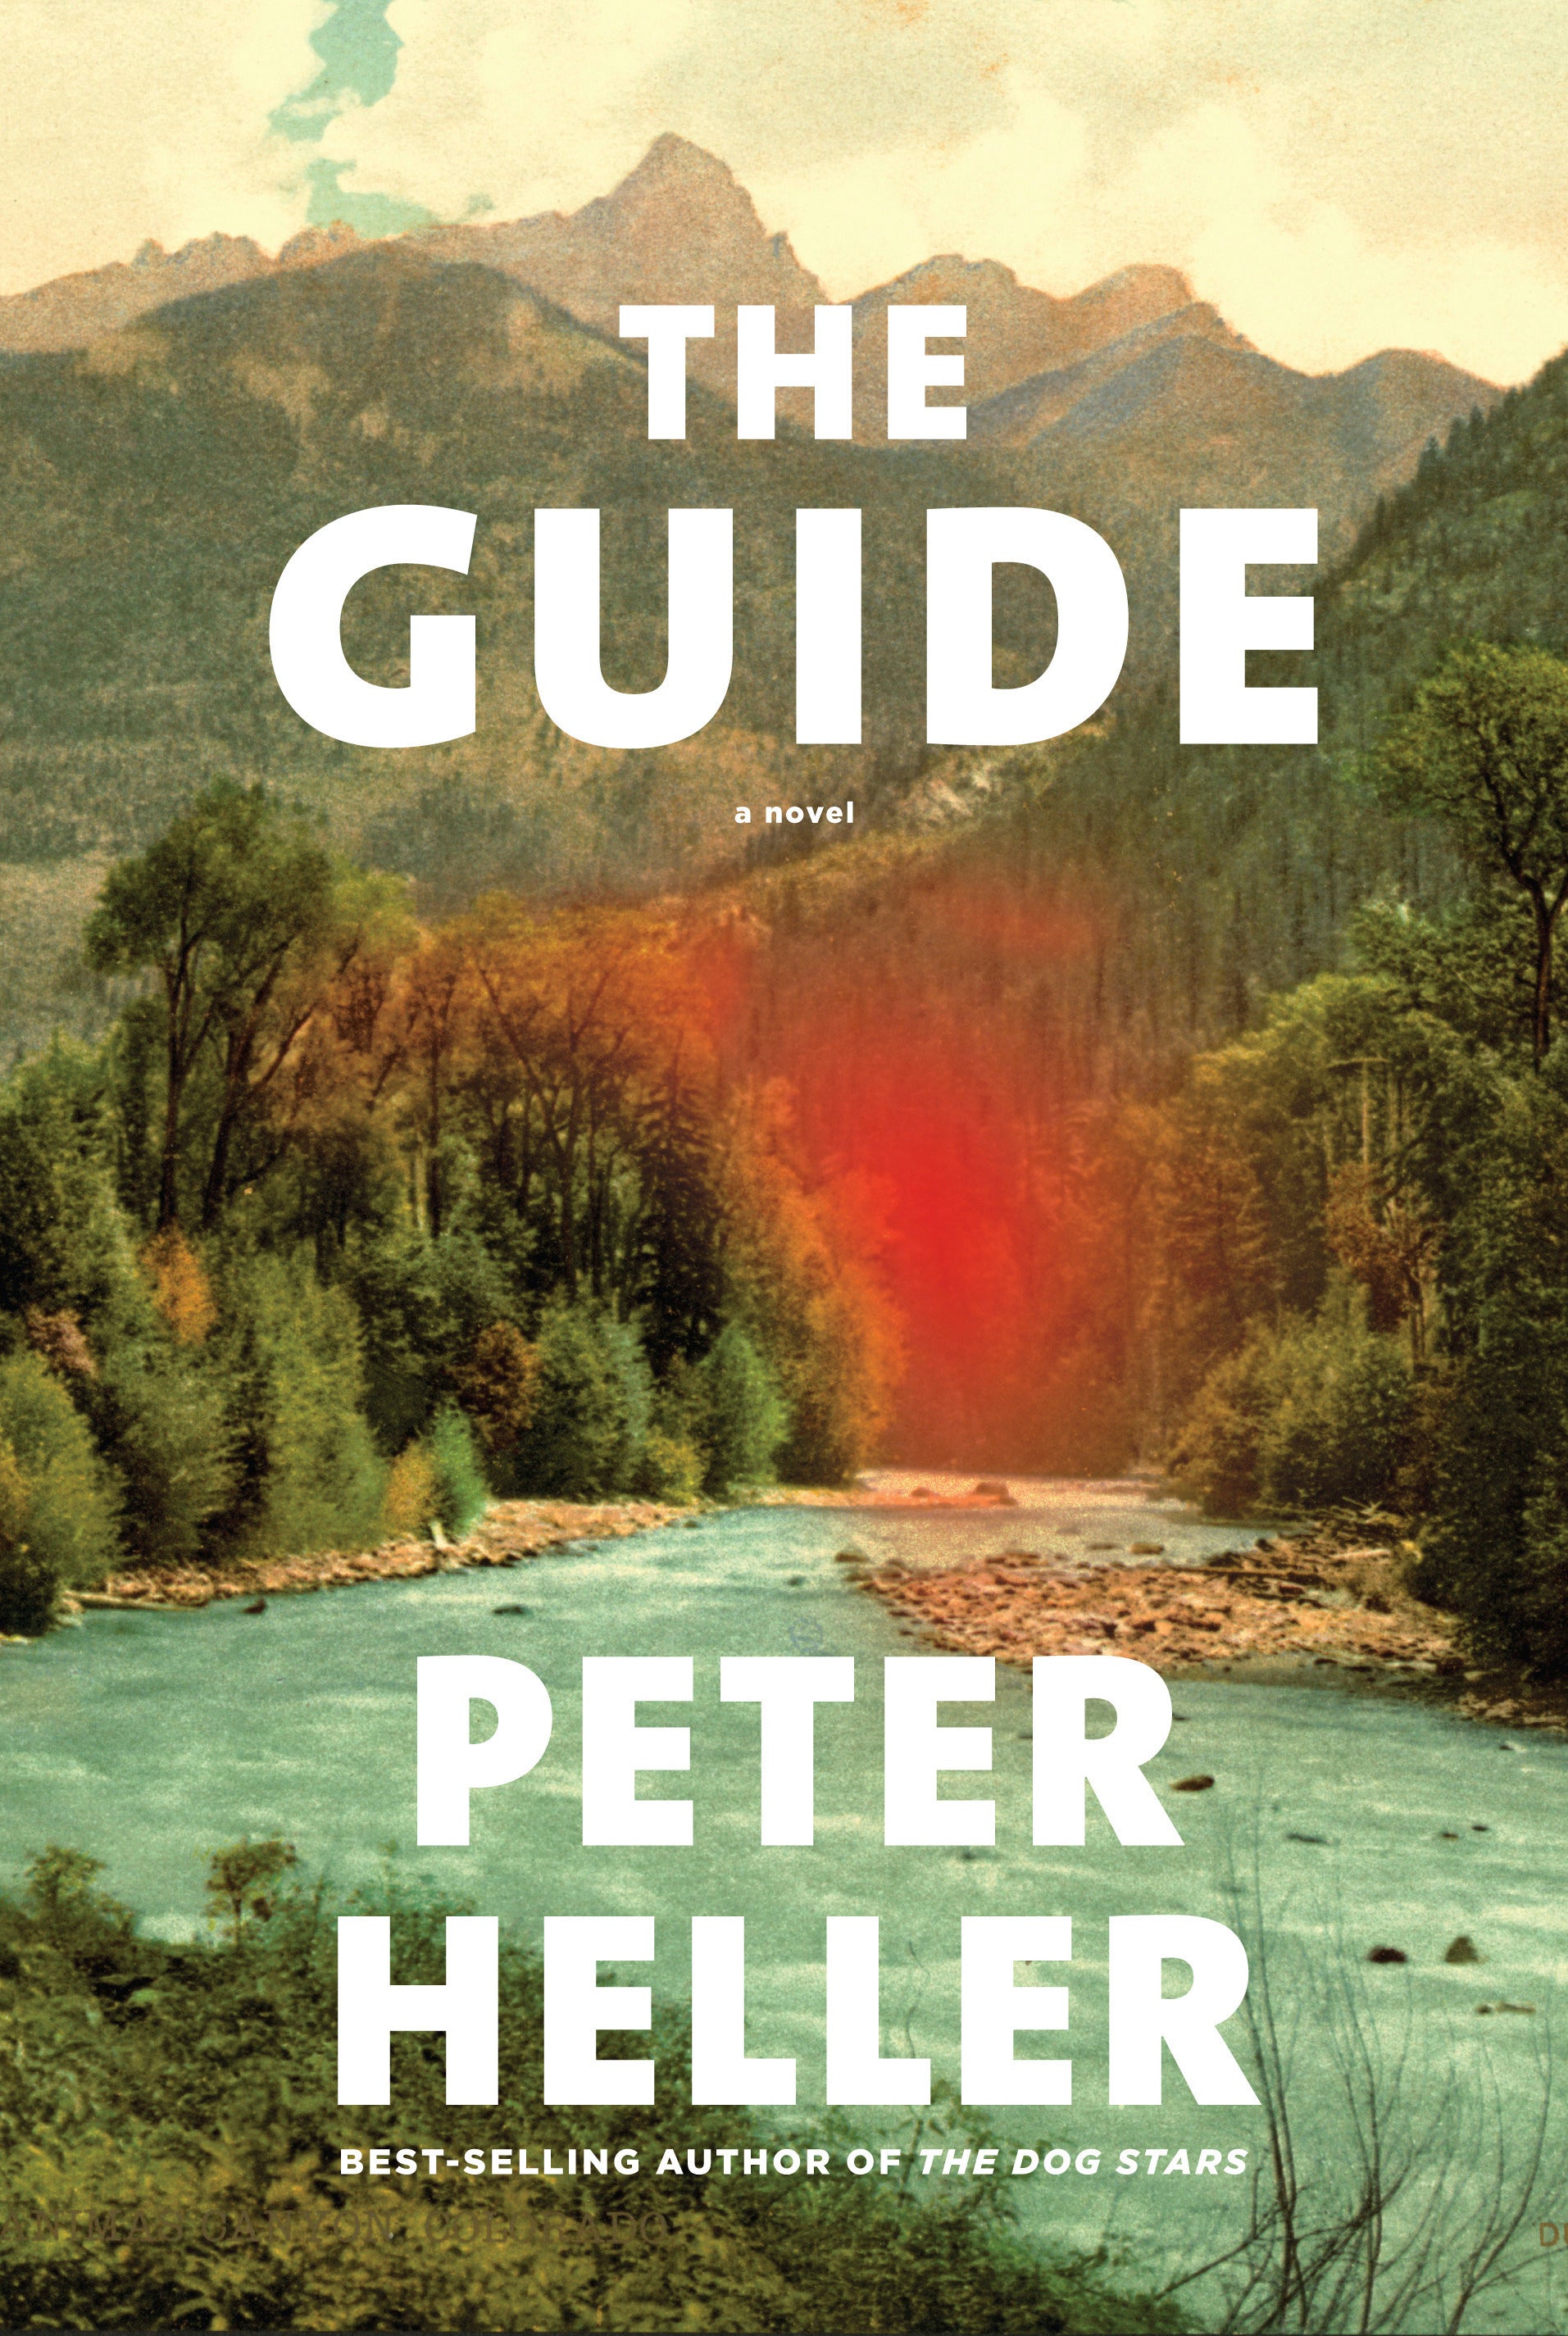 Book Review - The Guide